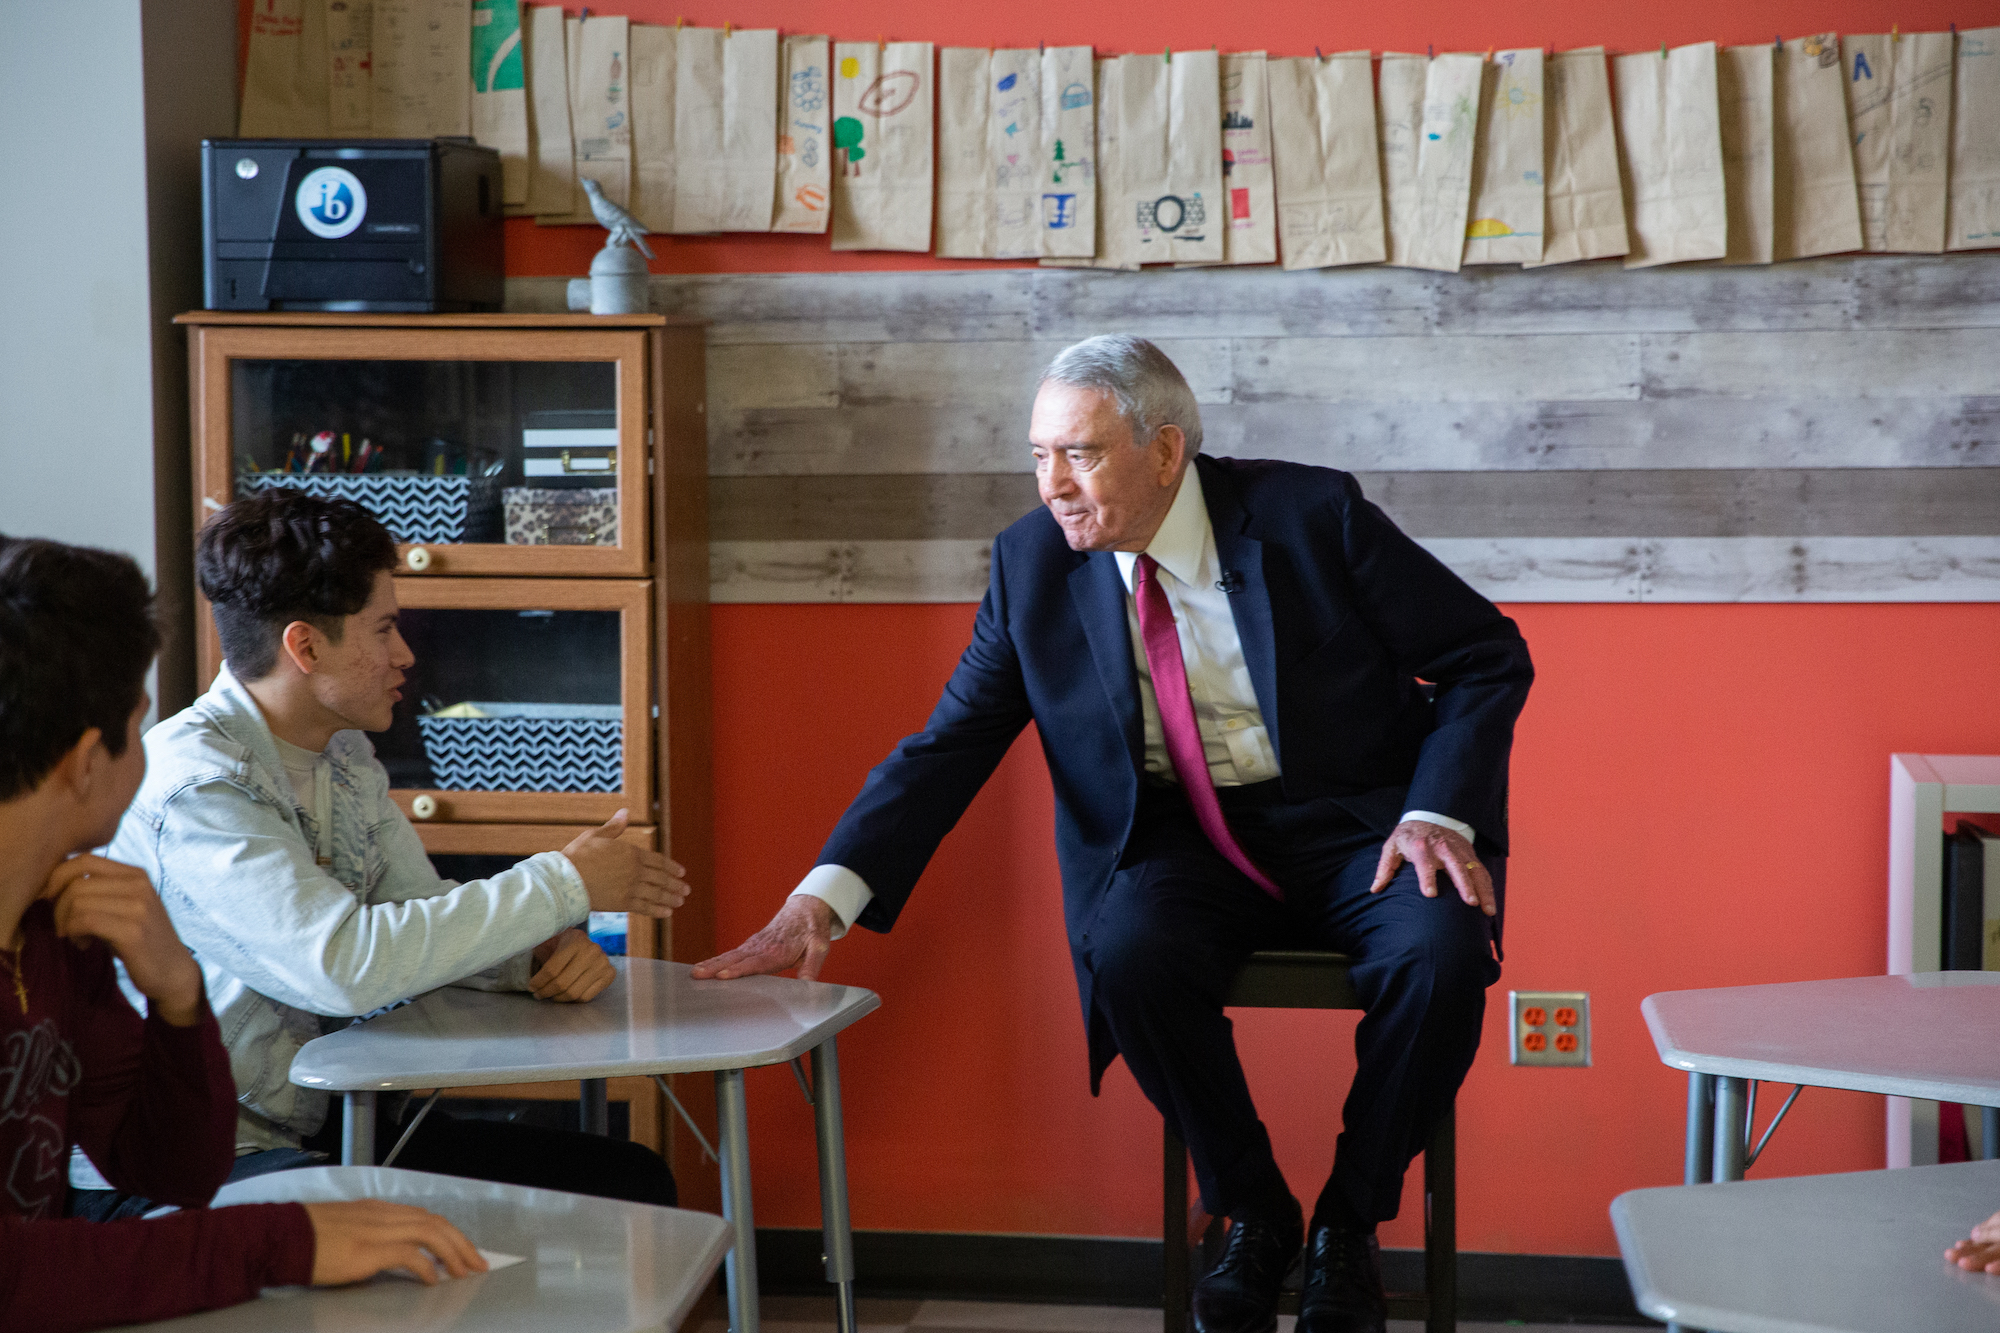 Legendary News Anchor Dan Rather meets with students at his alma mater in Houston ISD. He poses questions to the current student body about the importance of public schools. In this photo he leans closer to the desk of a student to better hear hear their thoughts.